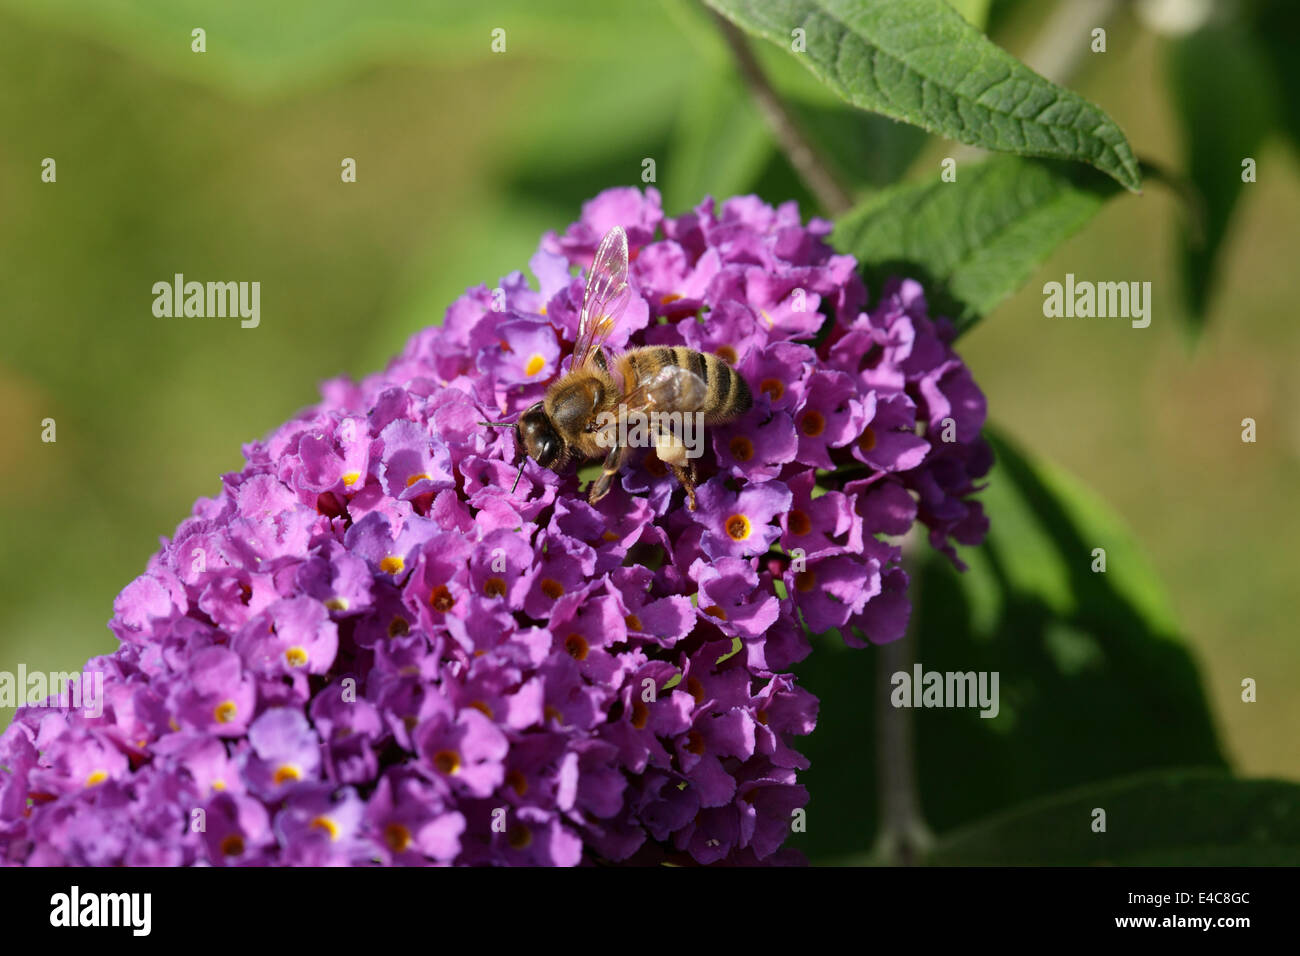 Honey bee on buddleia flower spike. Pollen basket clearly visible. Stock Photo